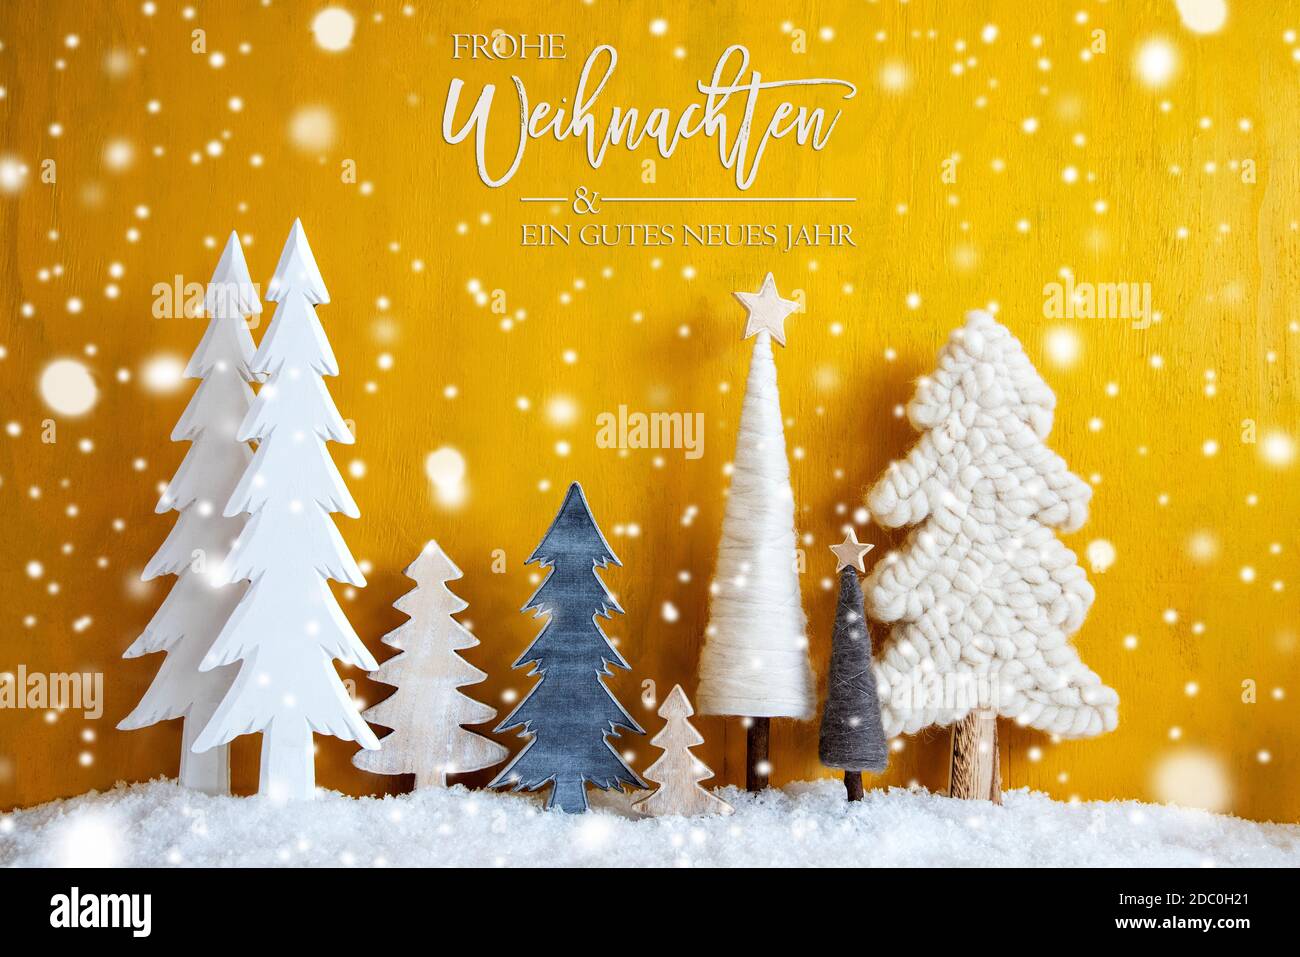 Trees With German Calligraphy Frohe Weihnachten Und Ein Gutes Neues Jahr Means Merry Christmas And A Happy New Year. Yellow Background With Snow And S Stock Photo